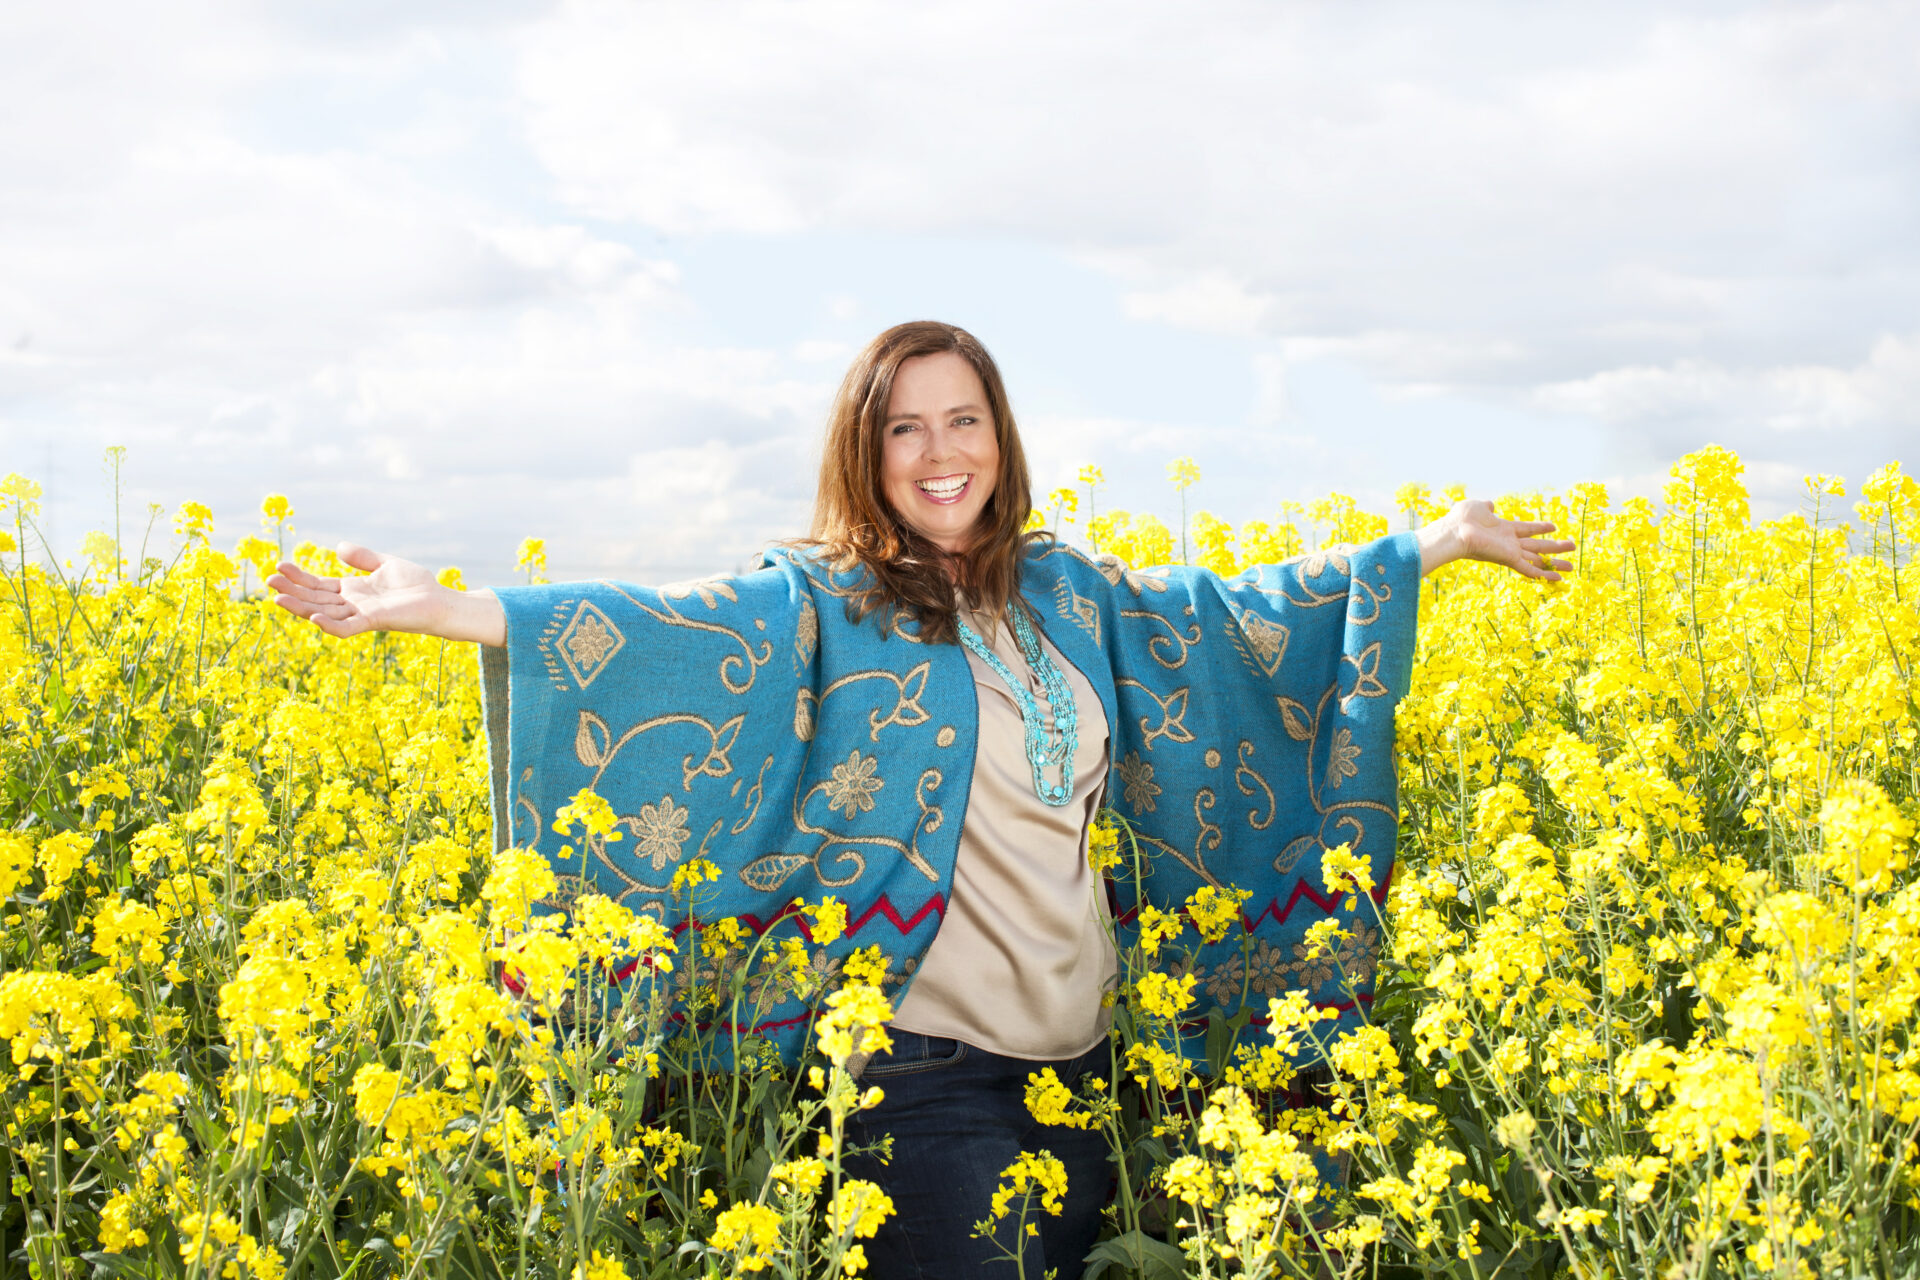 Smiling lady standing in yellow field of flowers wearing a green shawl